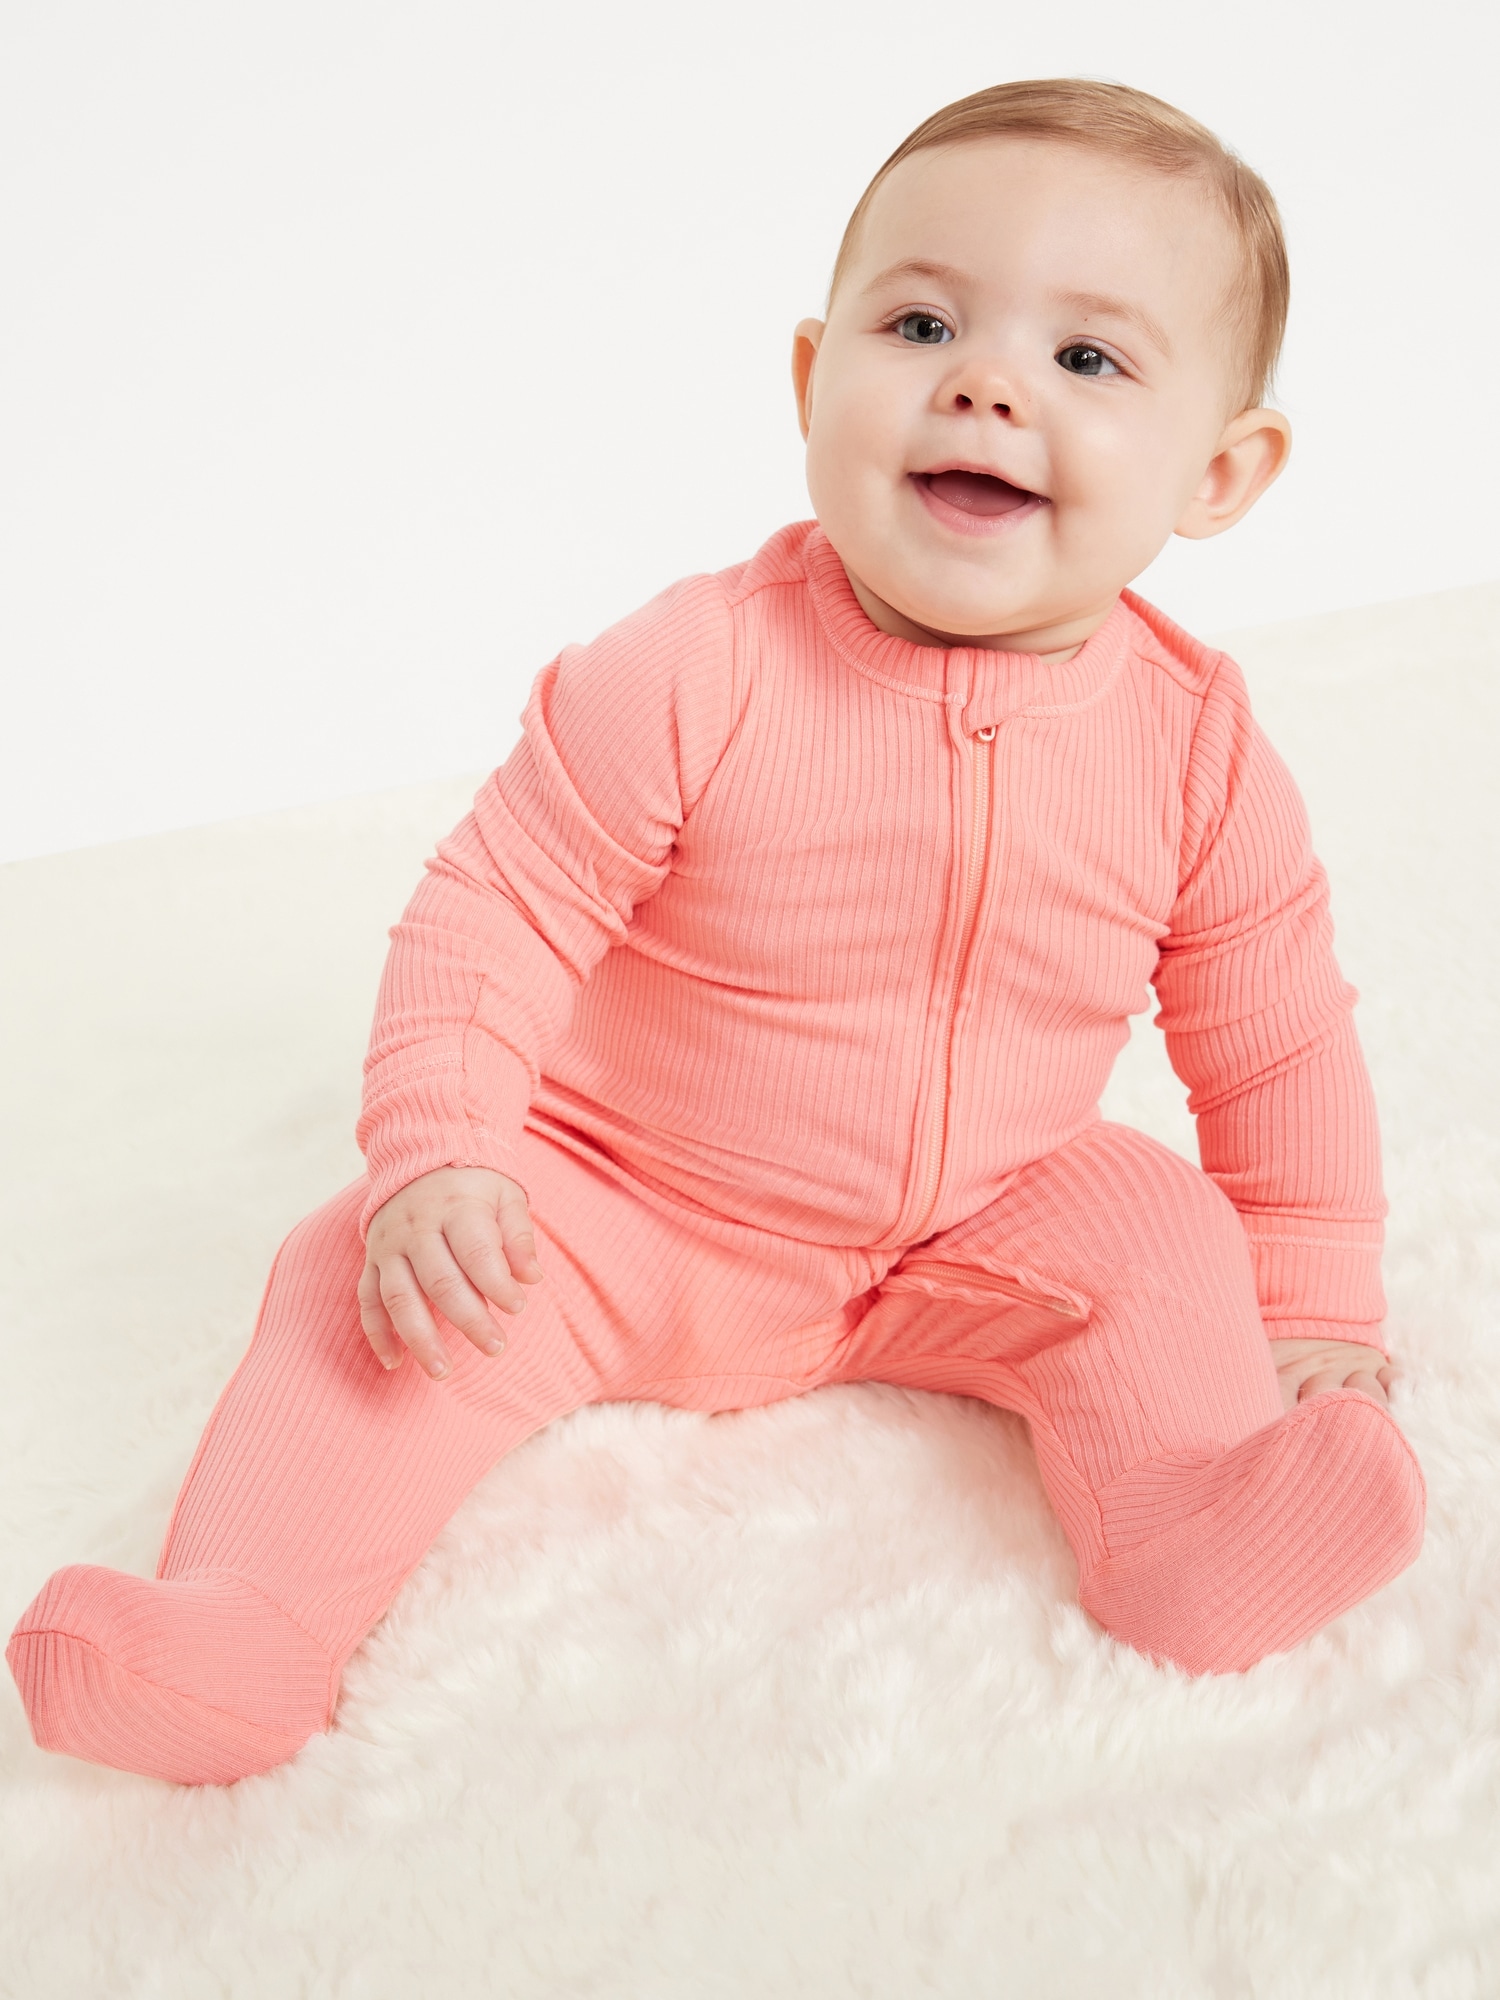 BABY PANTS, CUTE COMFORTABLE TROUSERS, UNISEX BABY CLOTHING - Minis Only